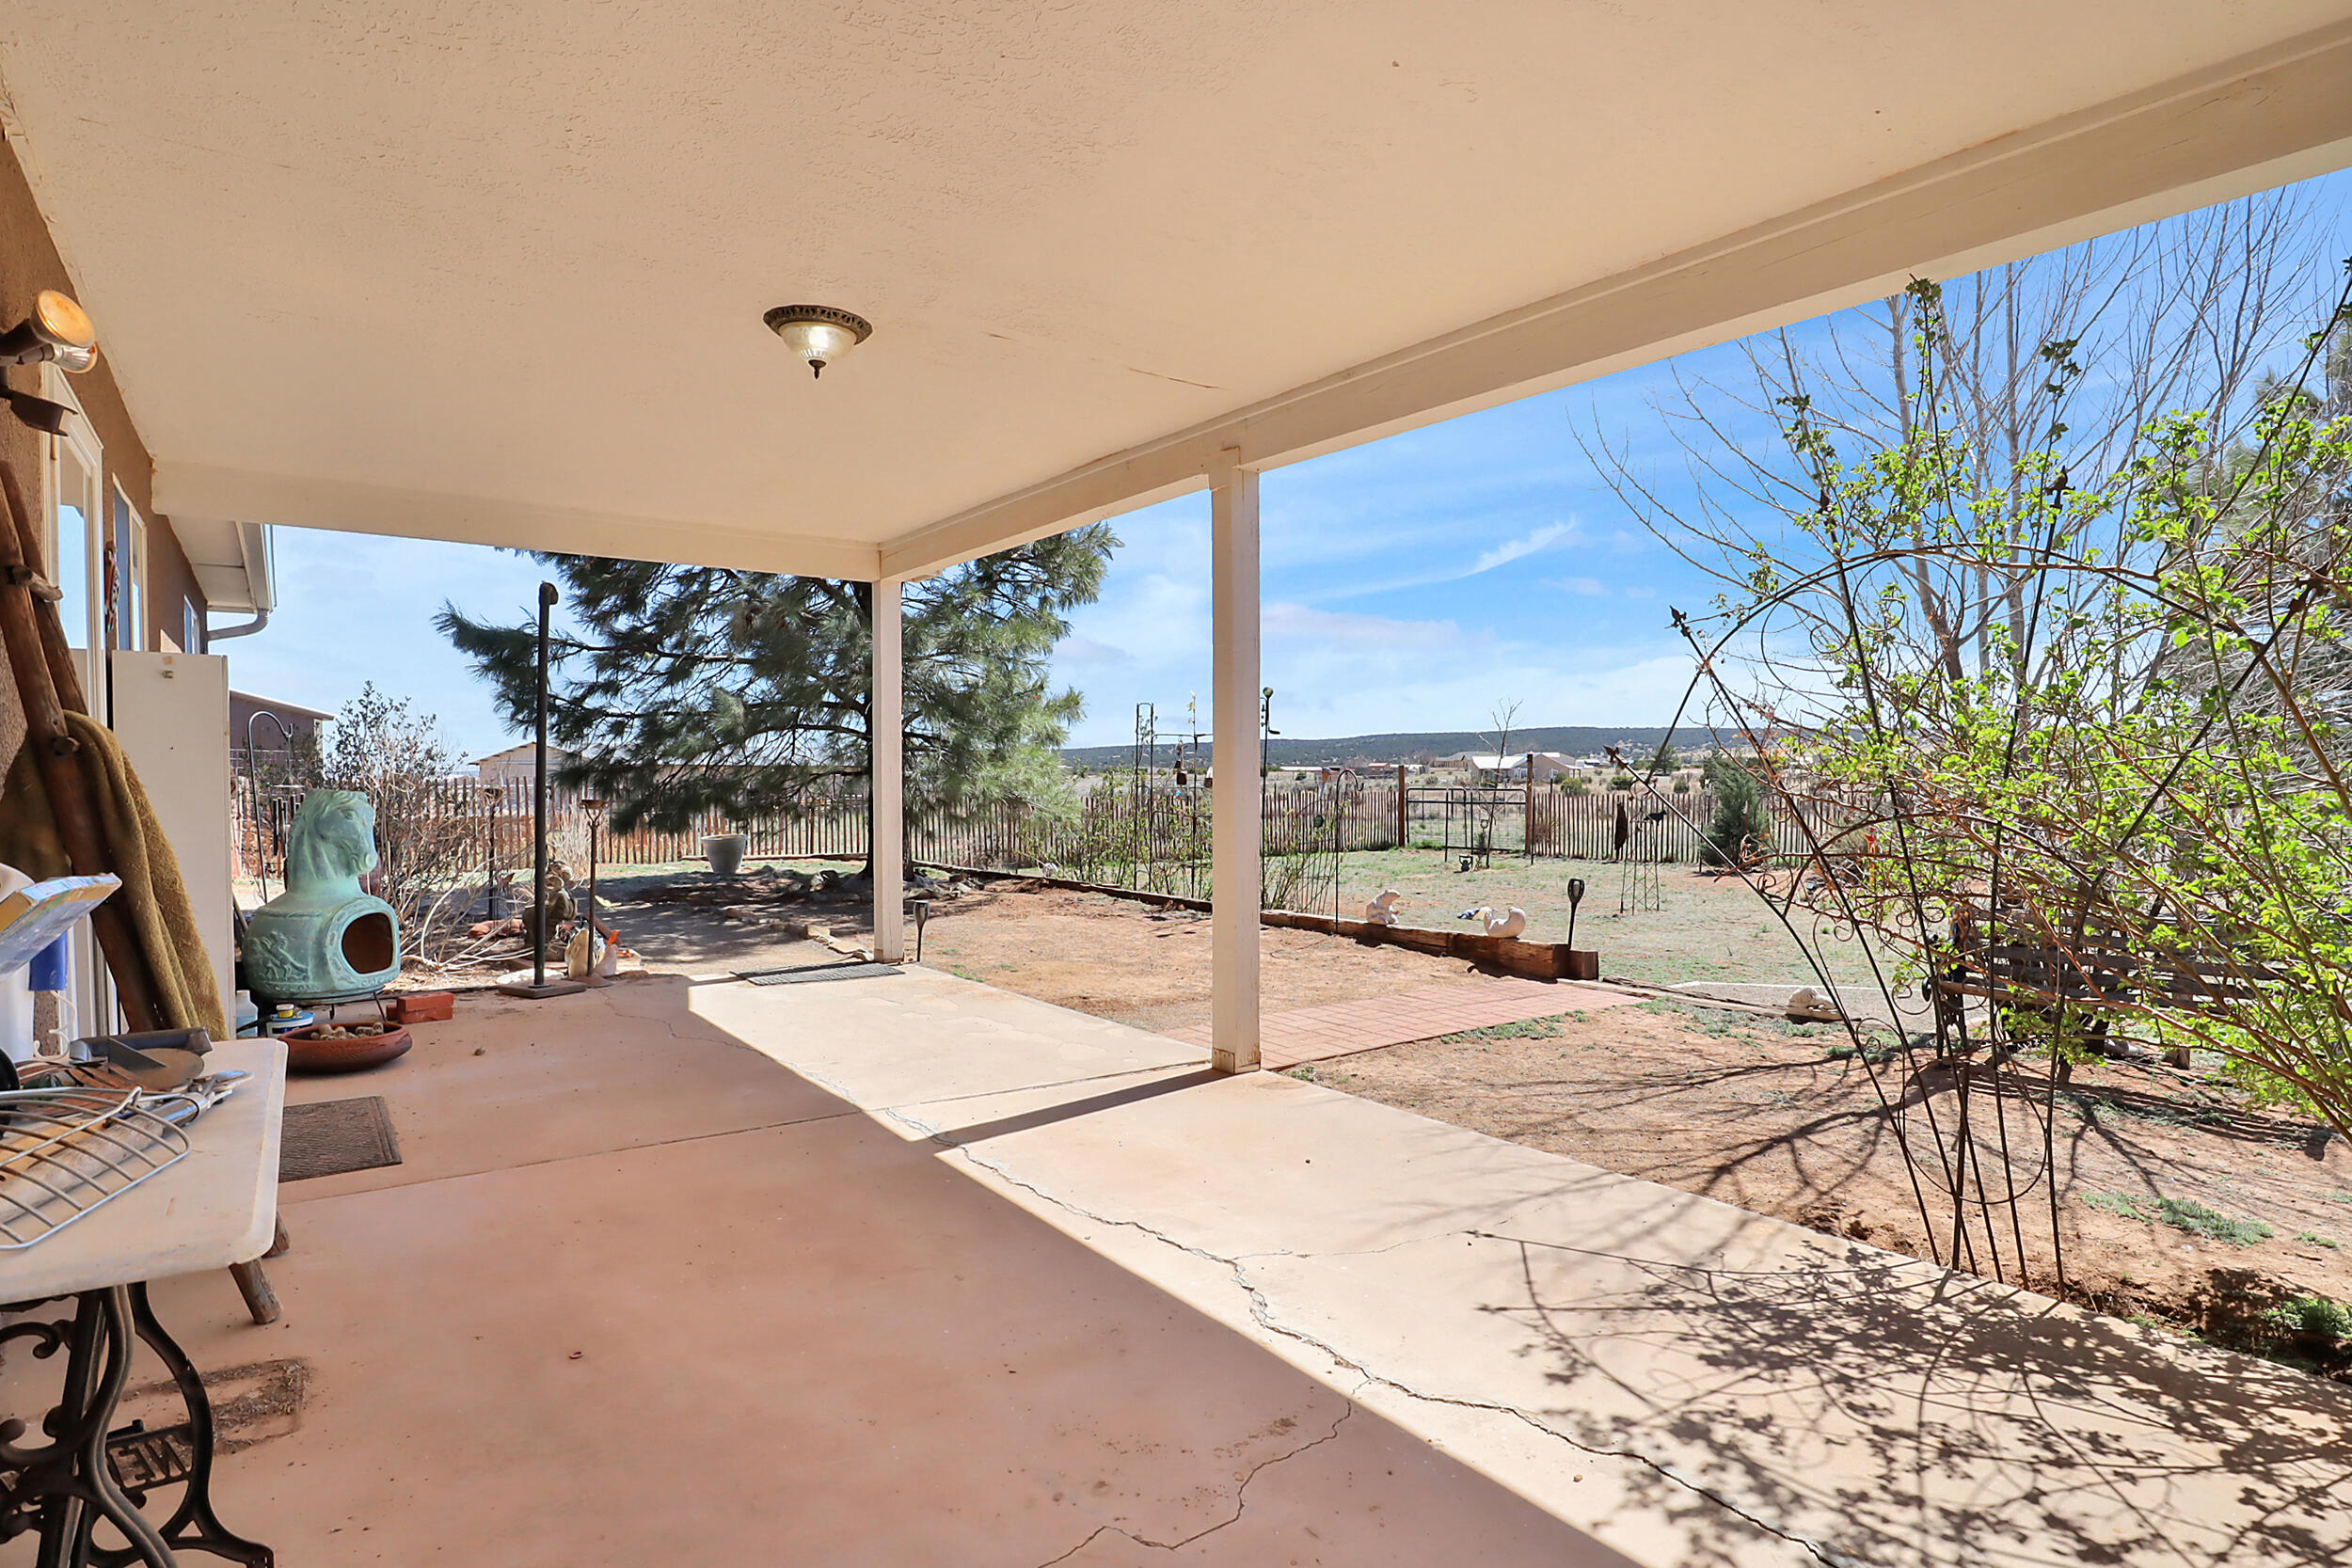 14 San Miguel Drive, Edgewood, New Mexico 87015, 4 Bedrooms Bedrooms, ,2 BathroomsBathrooms,Residential,For Sale,14 San Miguel Drive,1061177